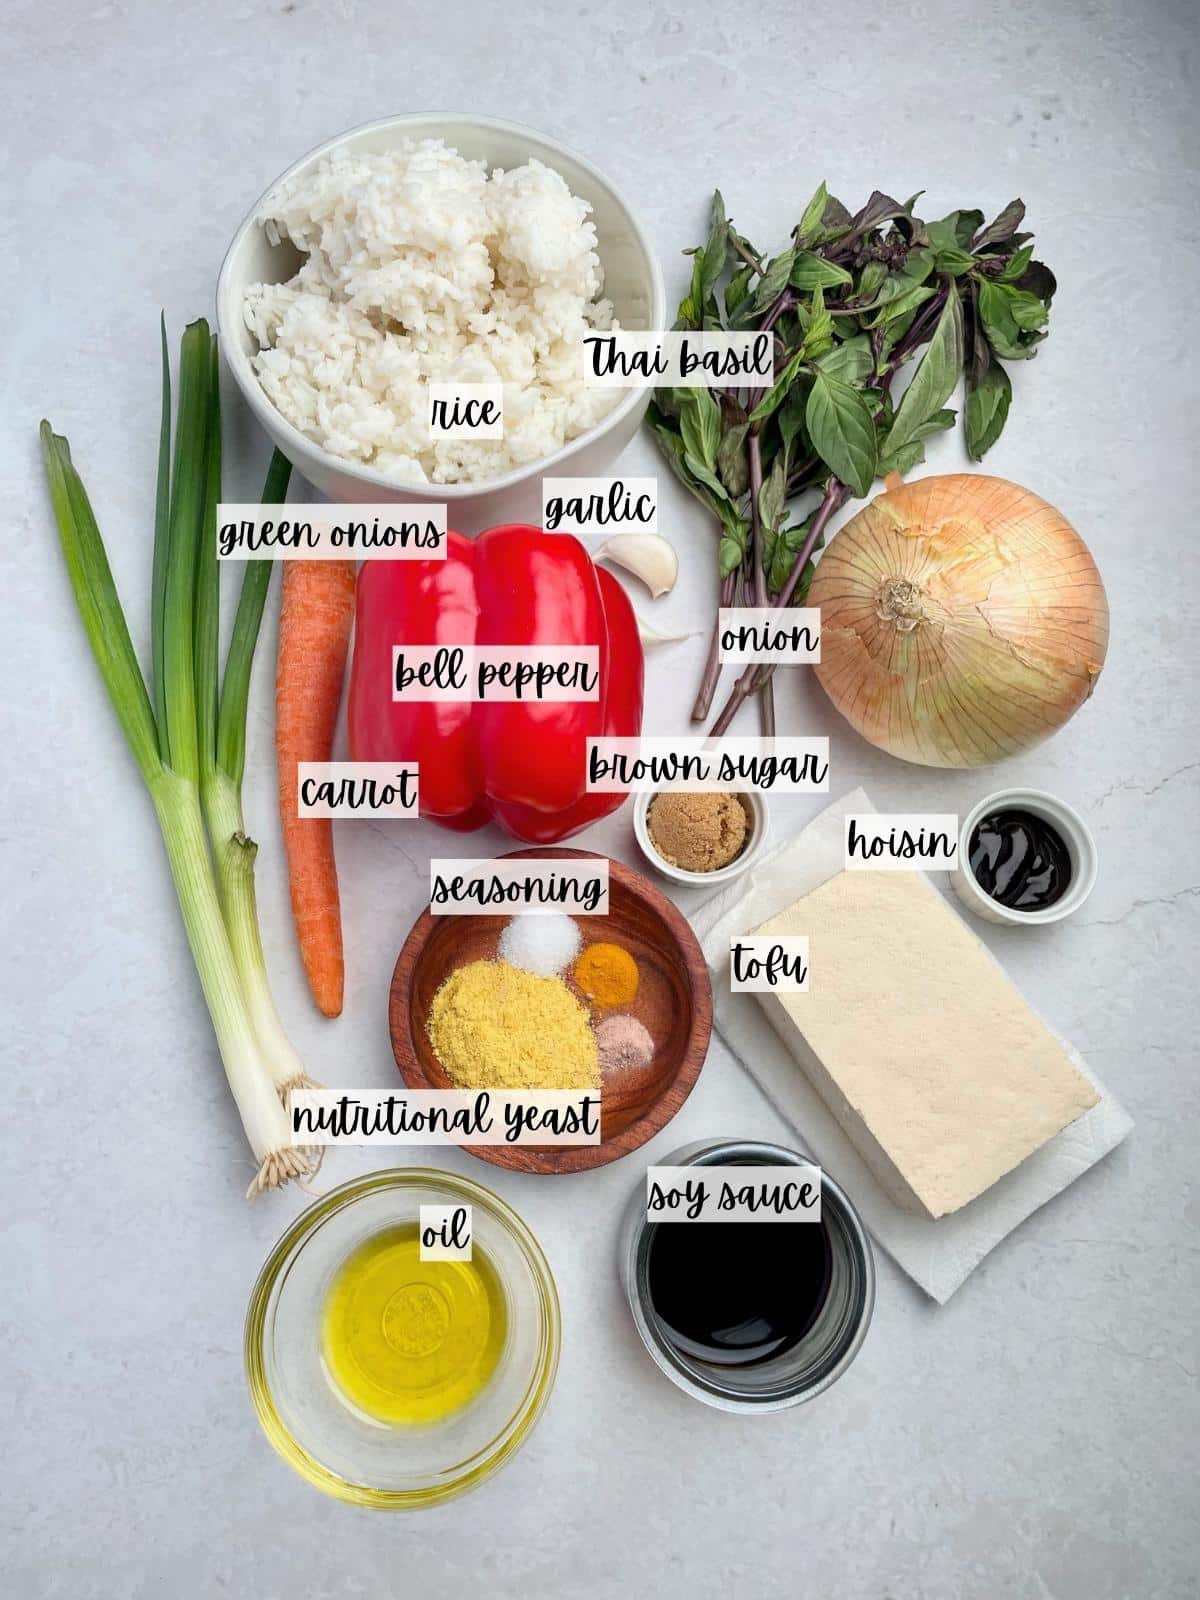 Labeled ingredients for thai fried rice.